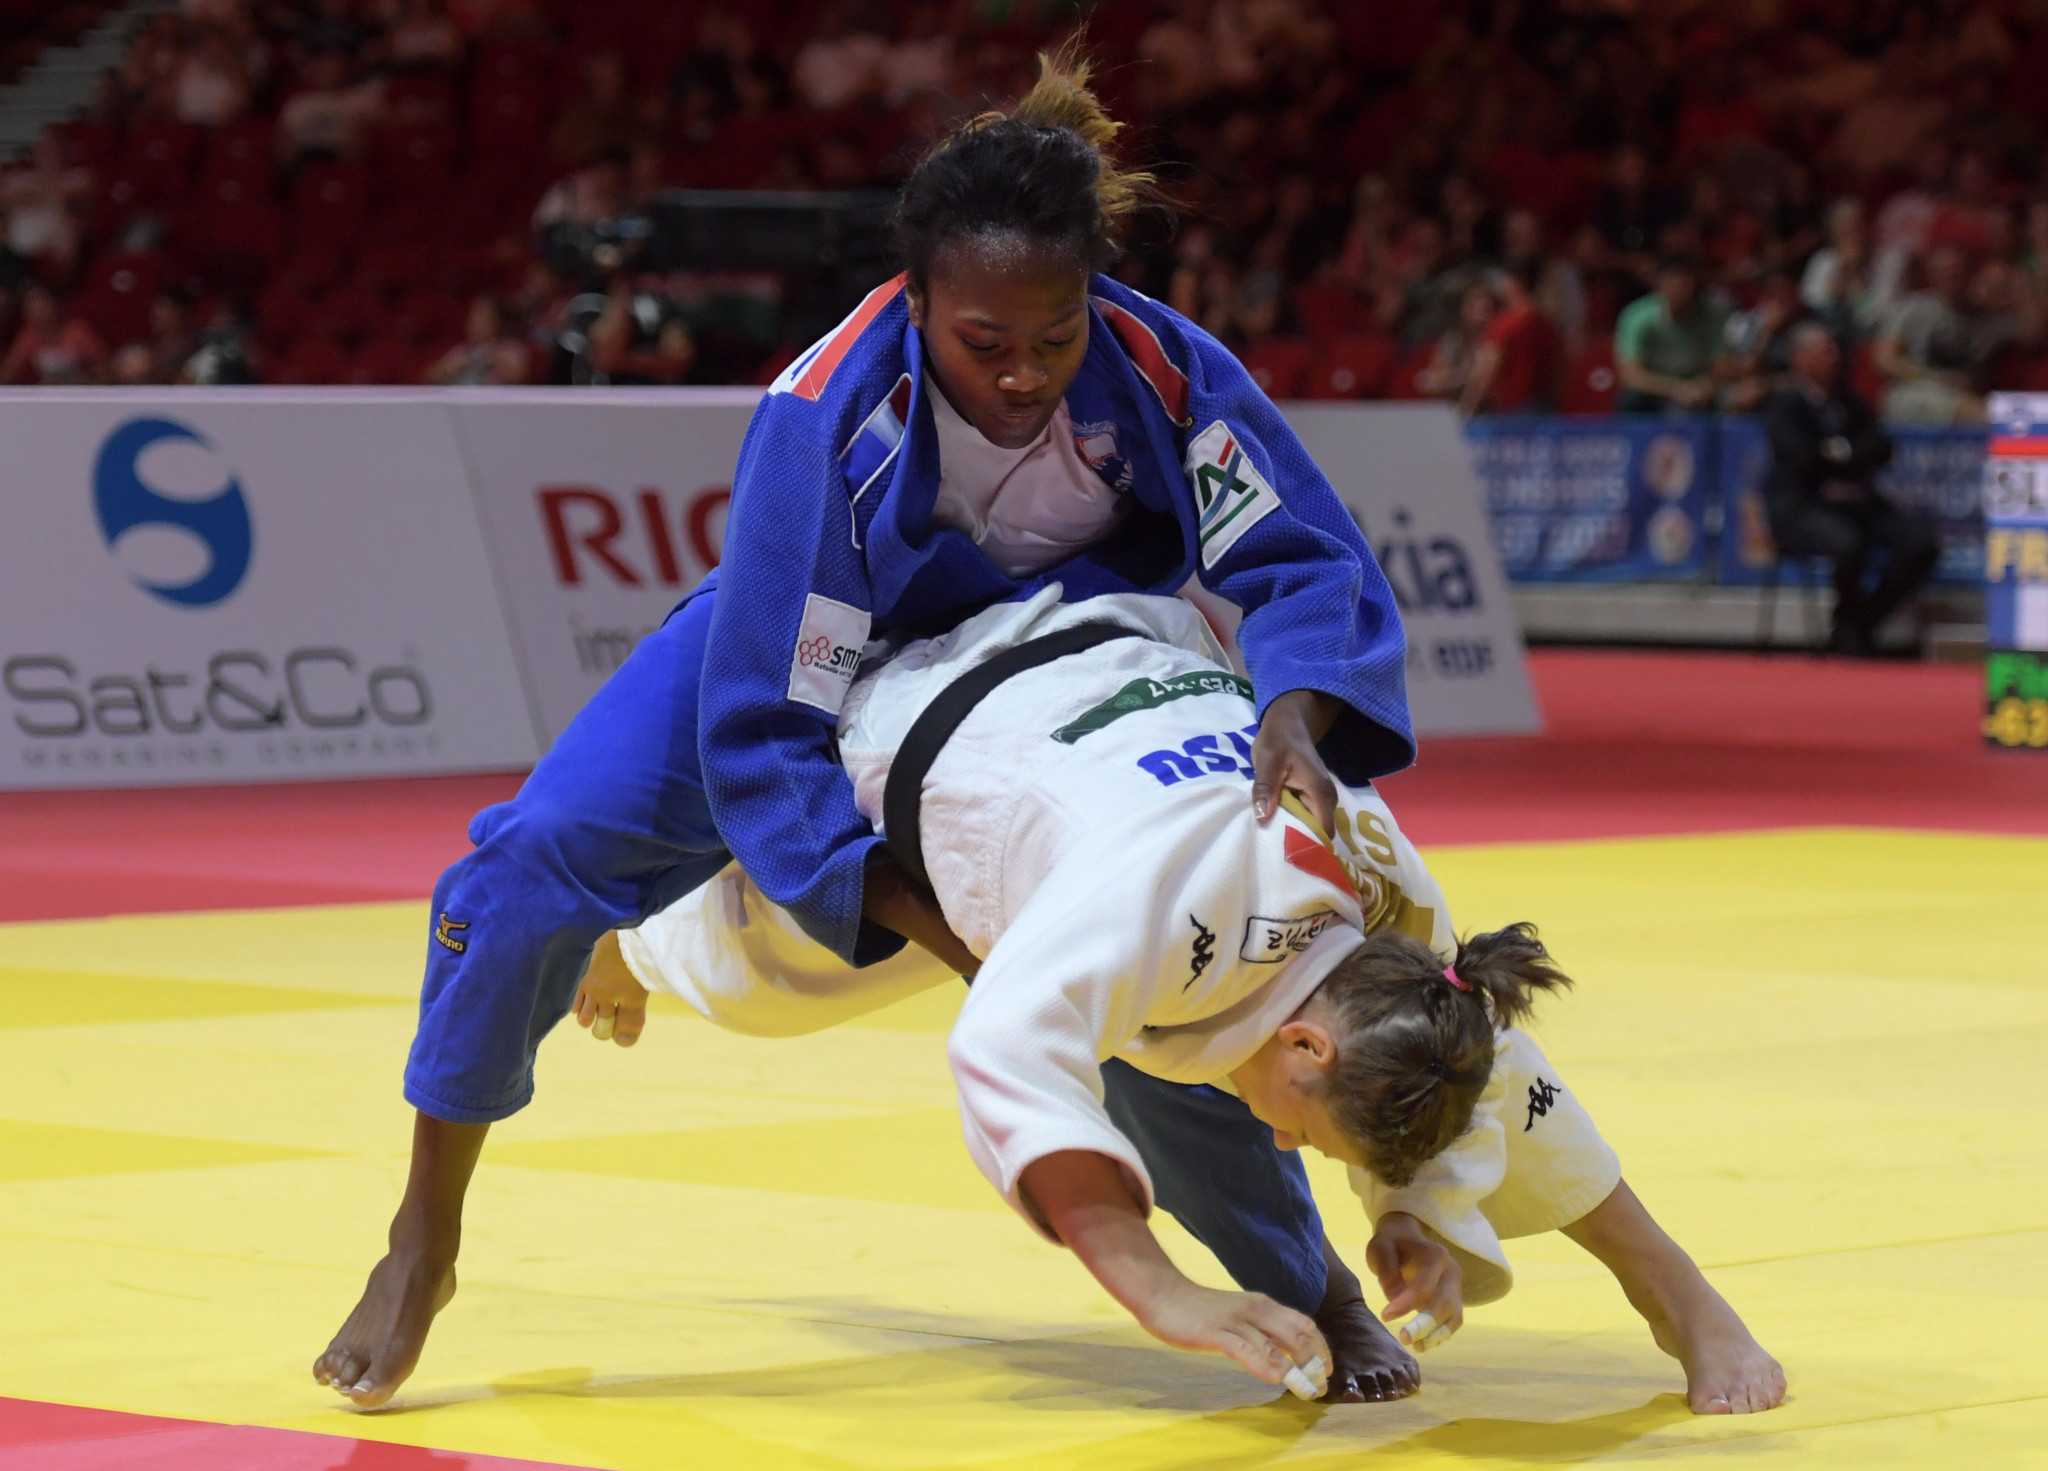 Agbegnenou and Wieczerzak claim gold medals on day four at IJF World Championships